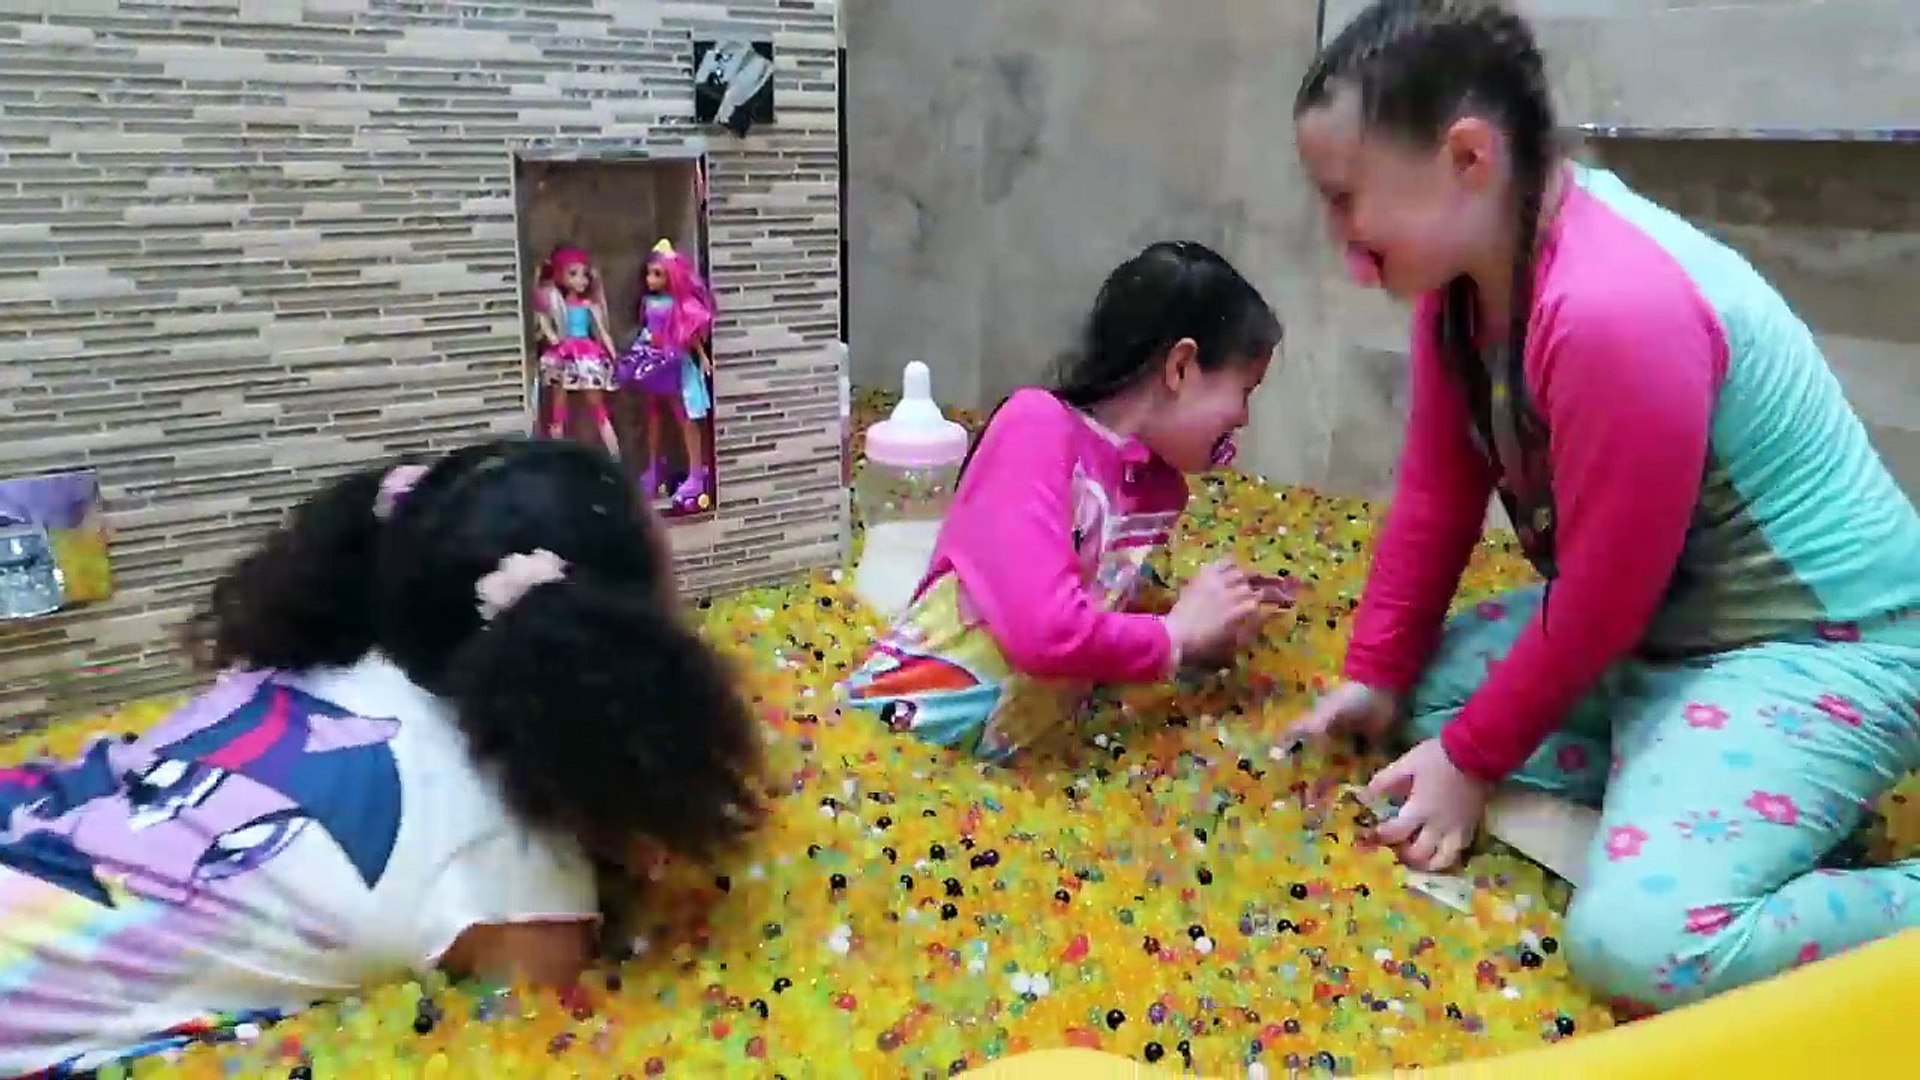 Bad Baby Tiana Messy Orbeez Bath Party Spa Explosion Mommy Freaks Out! -  video Dailymotion